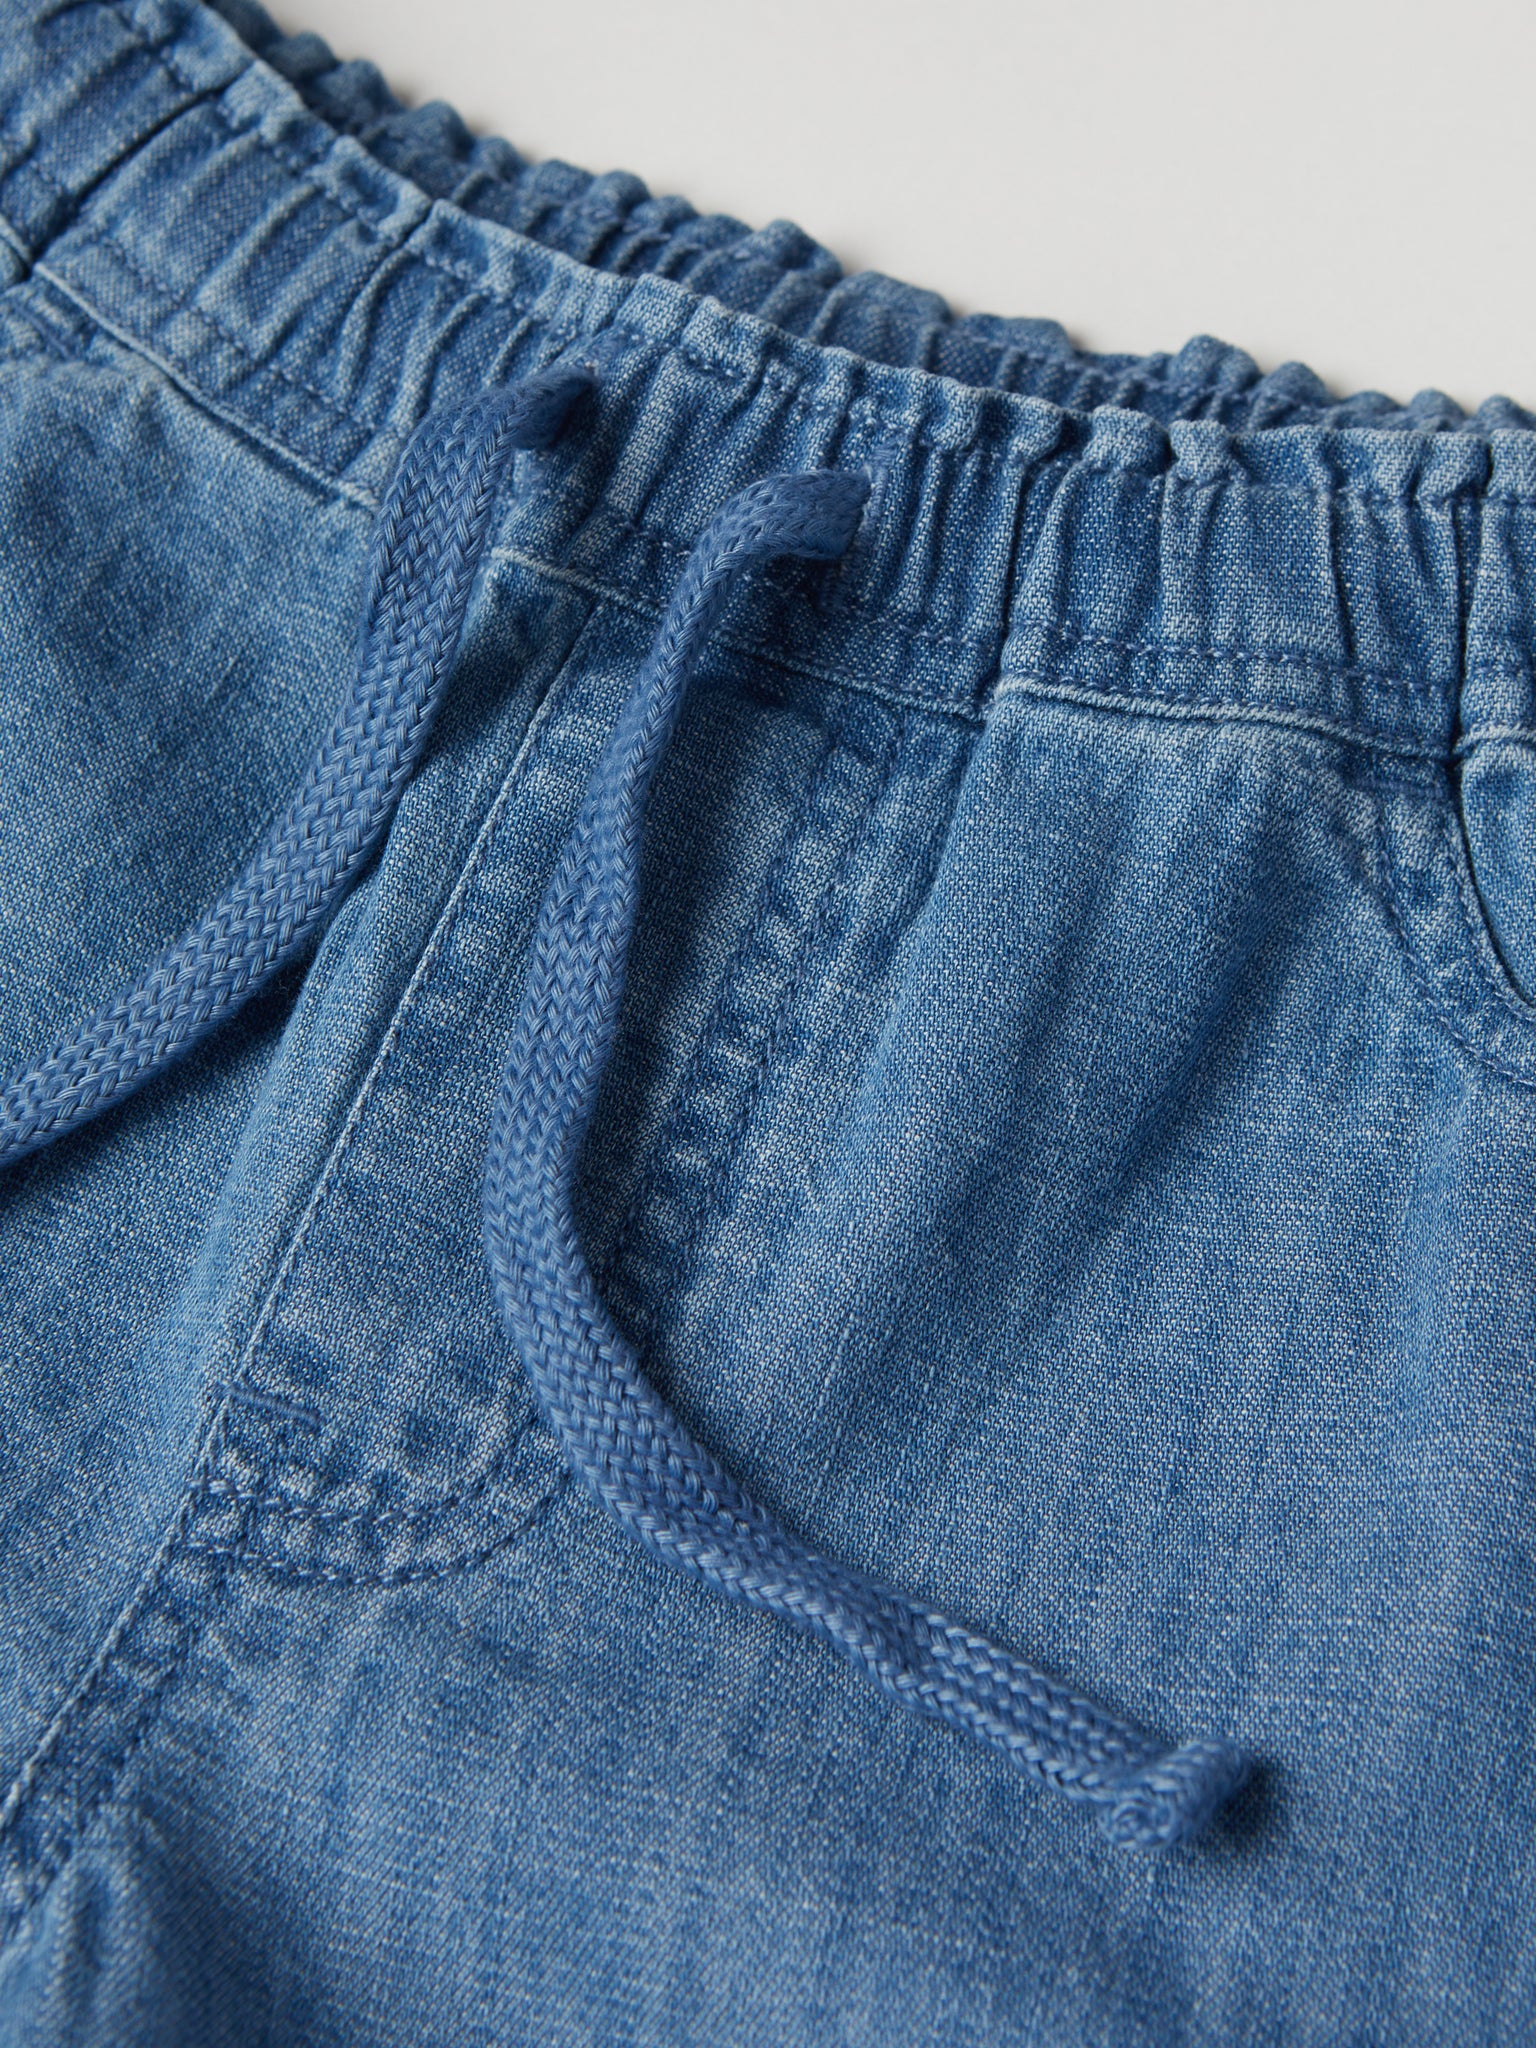 Cotton Denim Kids Shorts from the Polarn O. Pyret kidswear collection. Nordic kids clothes made from sustainable sources.